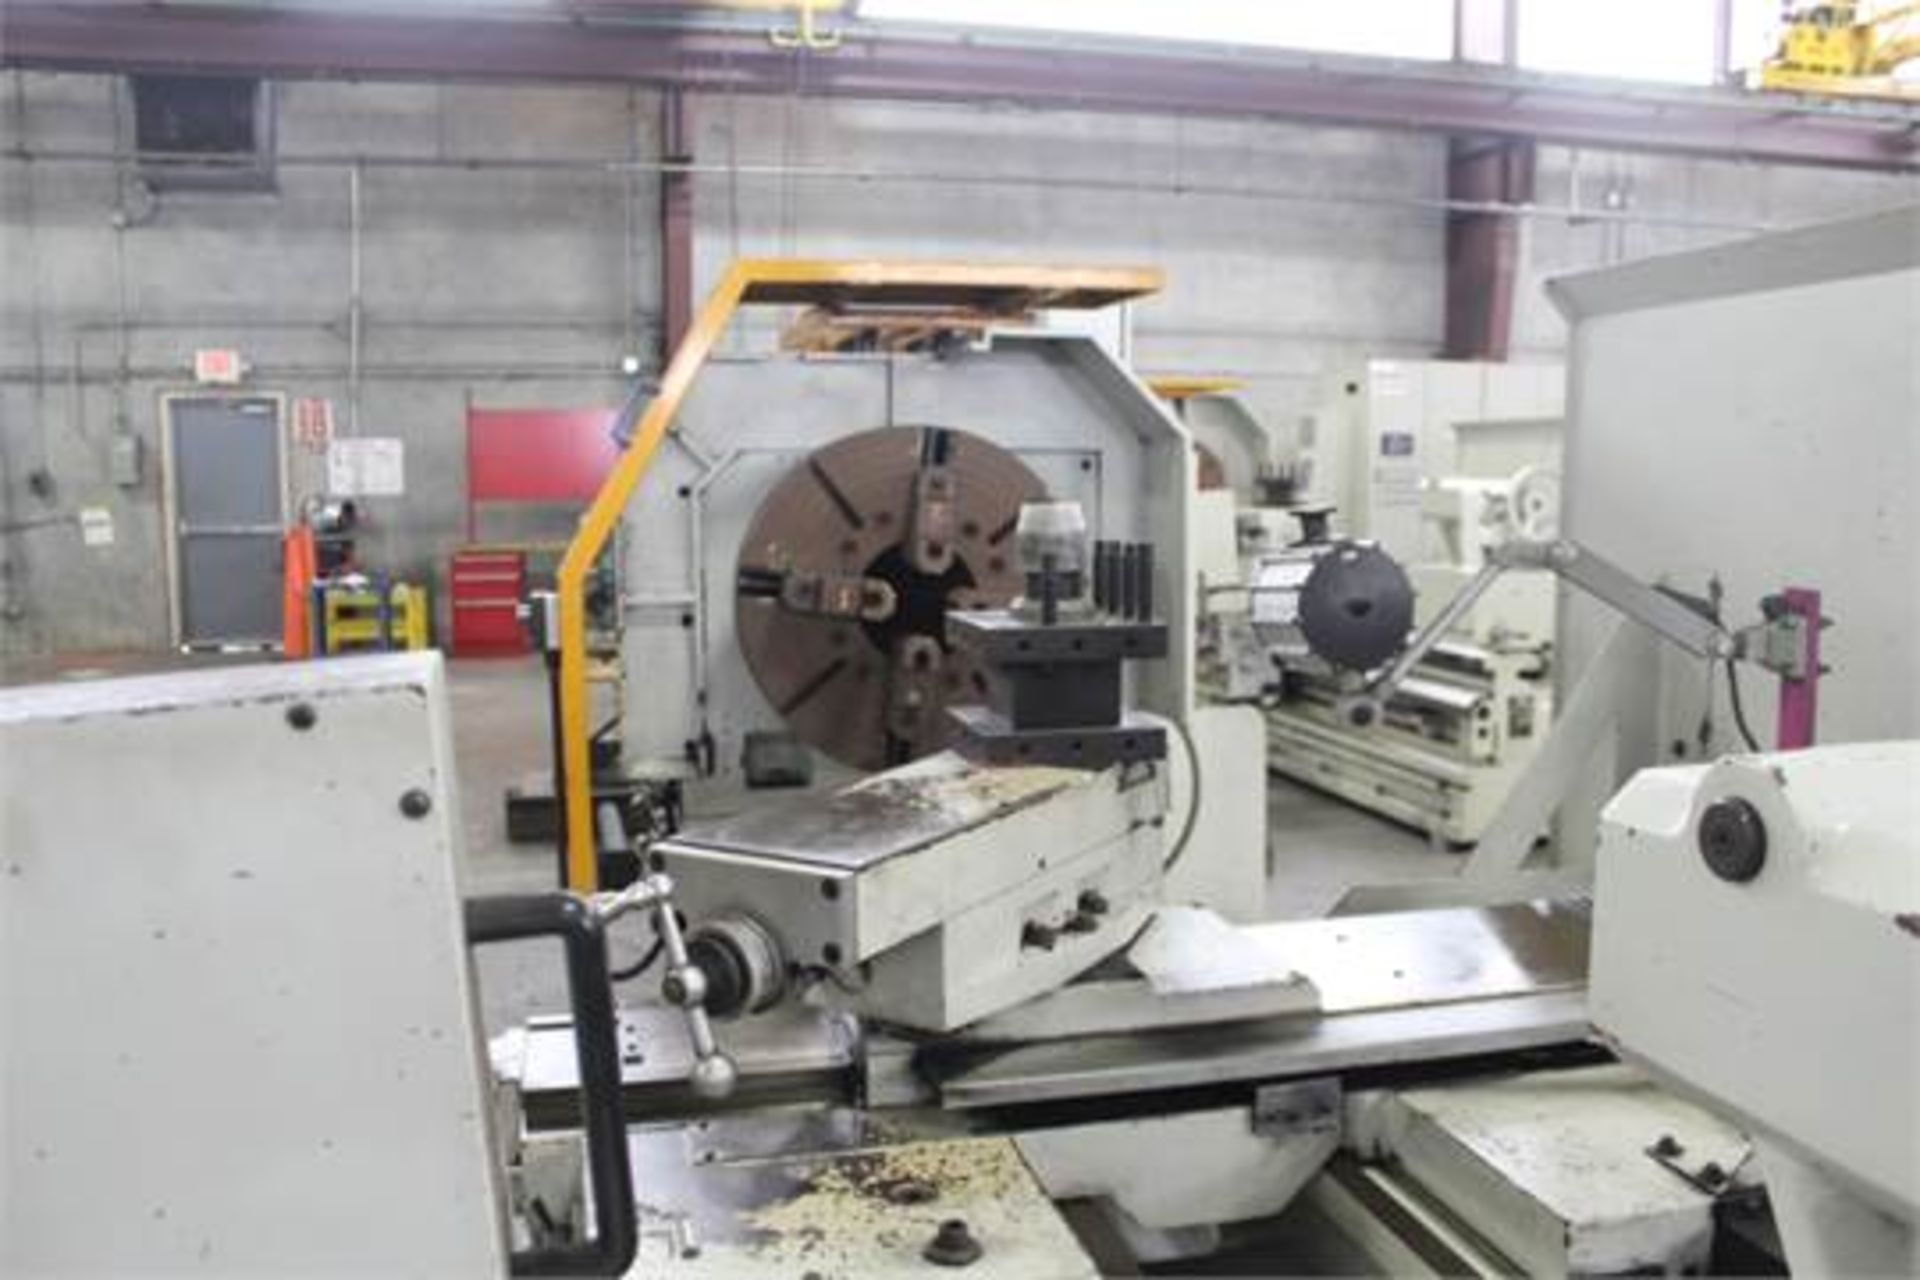 Eisen PA35 Heavy Duty Hollow Spindle Lathe, 34” swing over bed, 60” center distance, A2-11 Spindle - Image 3 of 5